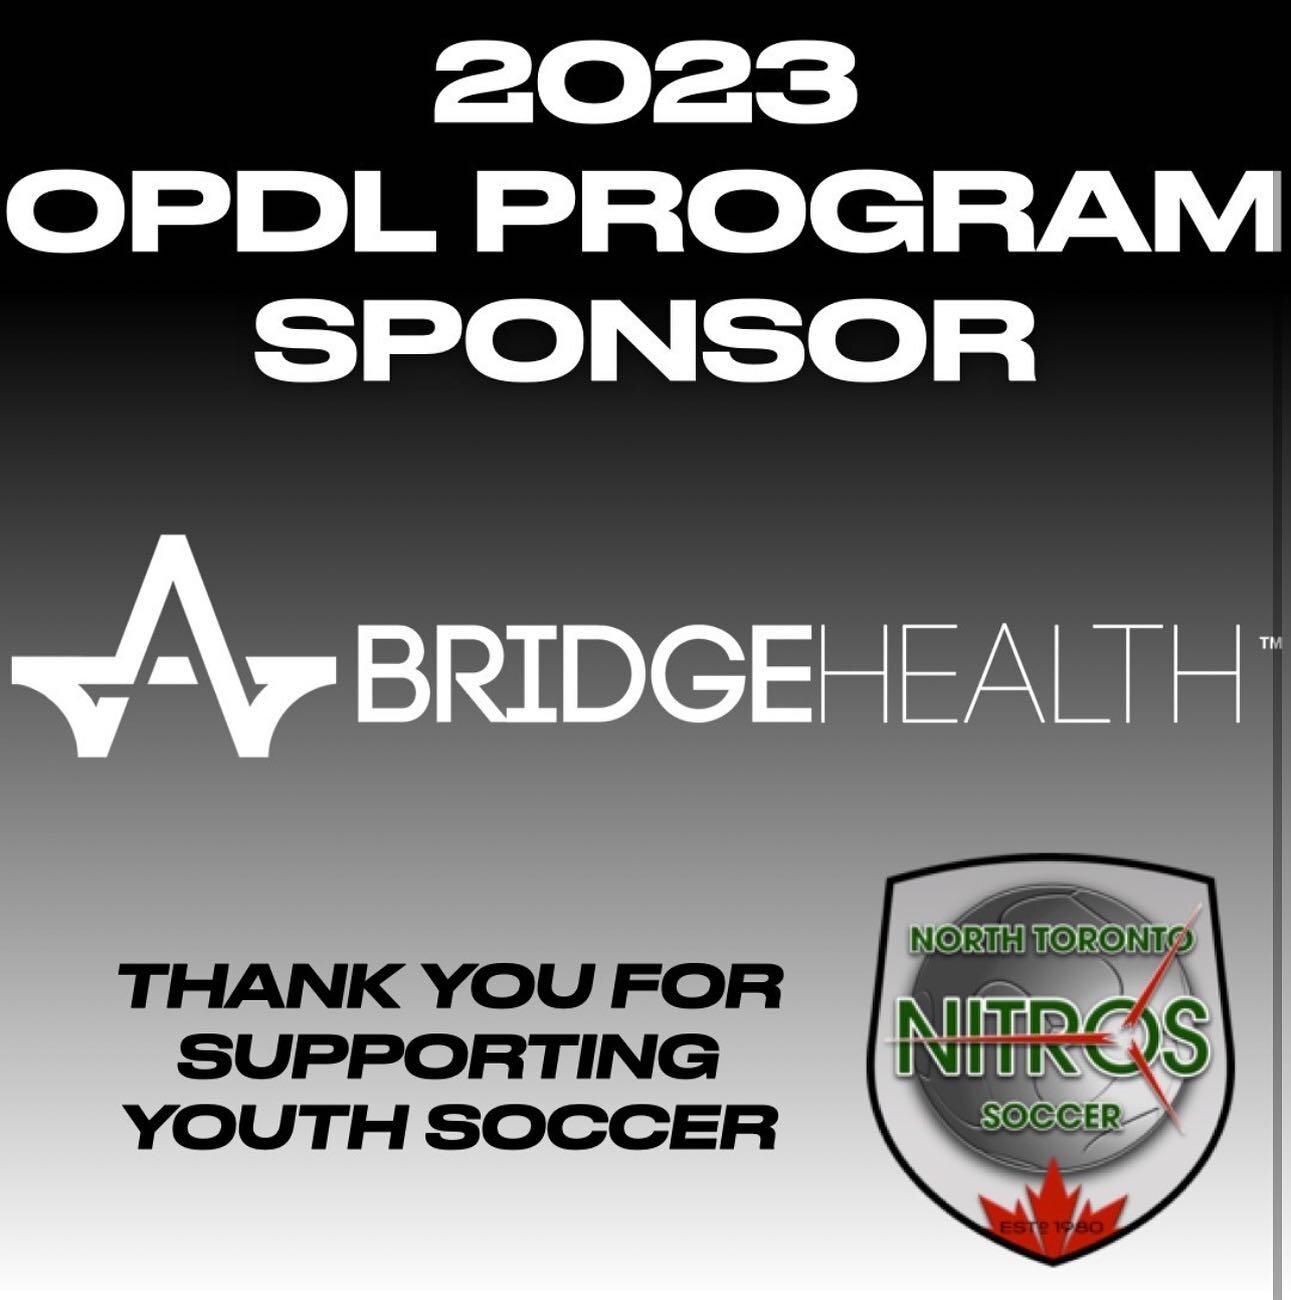 We are so happy to officially announce our sponsorship to the @nt_soccerclub OPDL program, which develops some of the best youth soccer players in Toronto, and Canada!